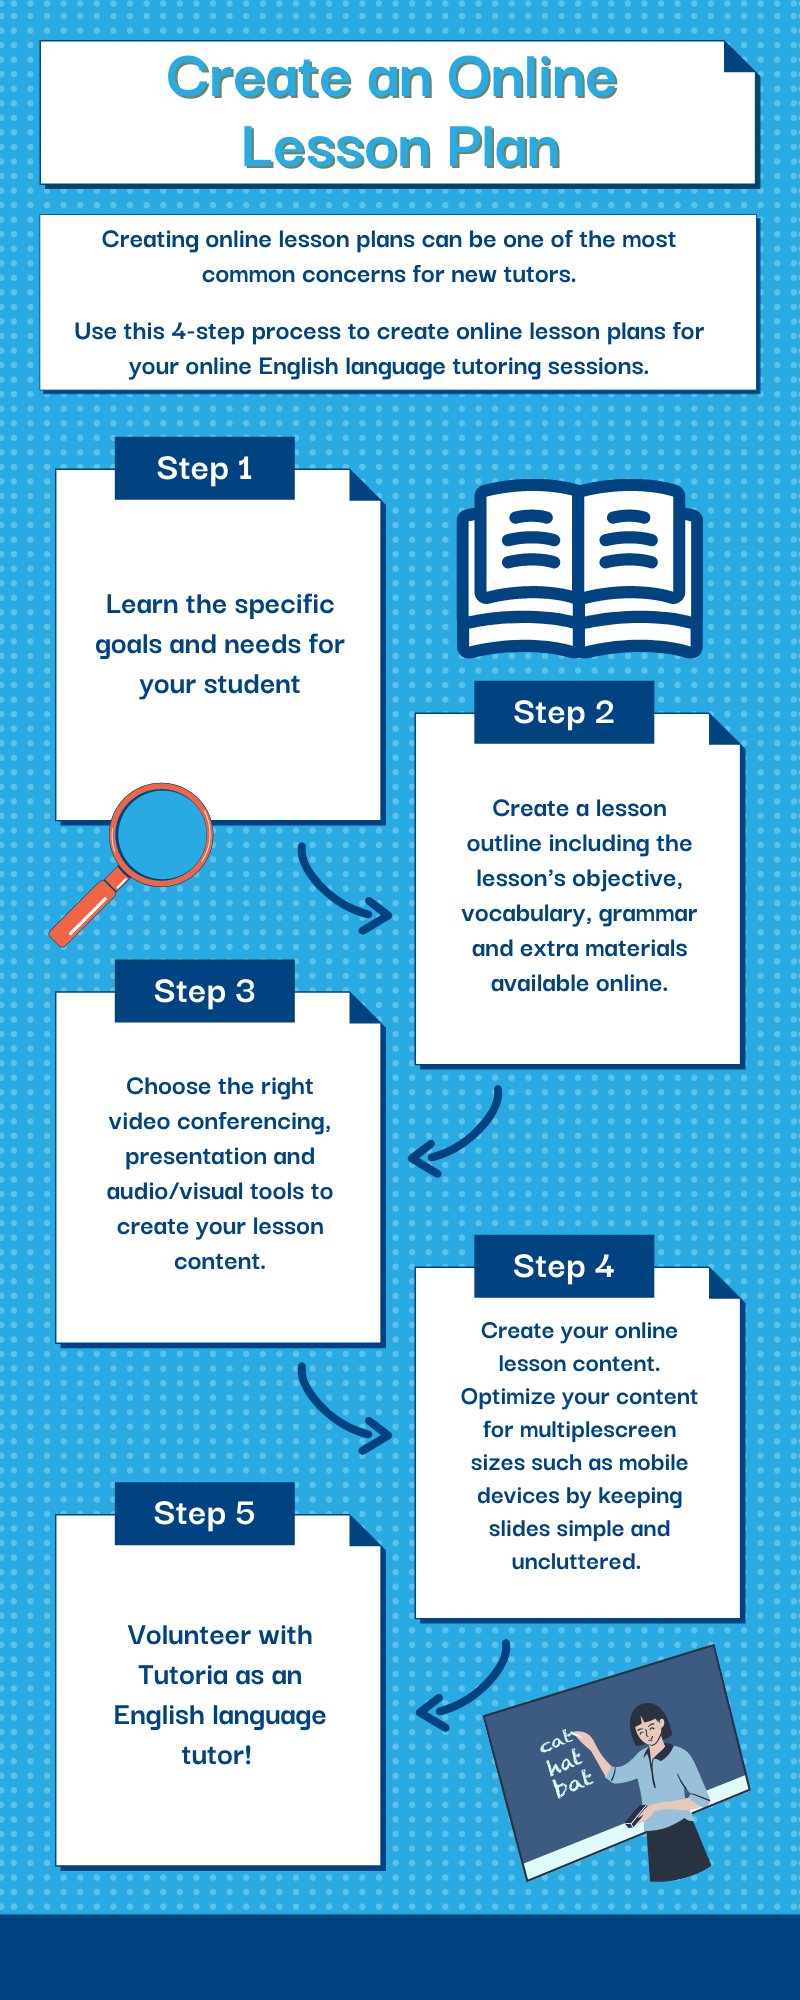 Infographic detailing 4-step guide to creating online lesson plan